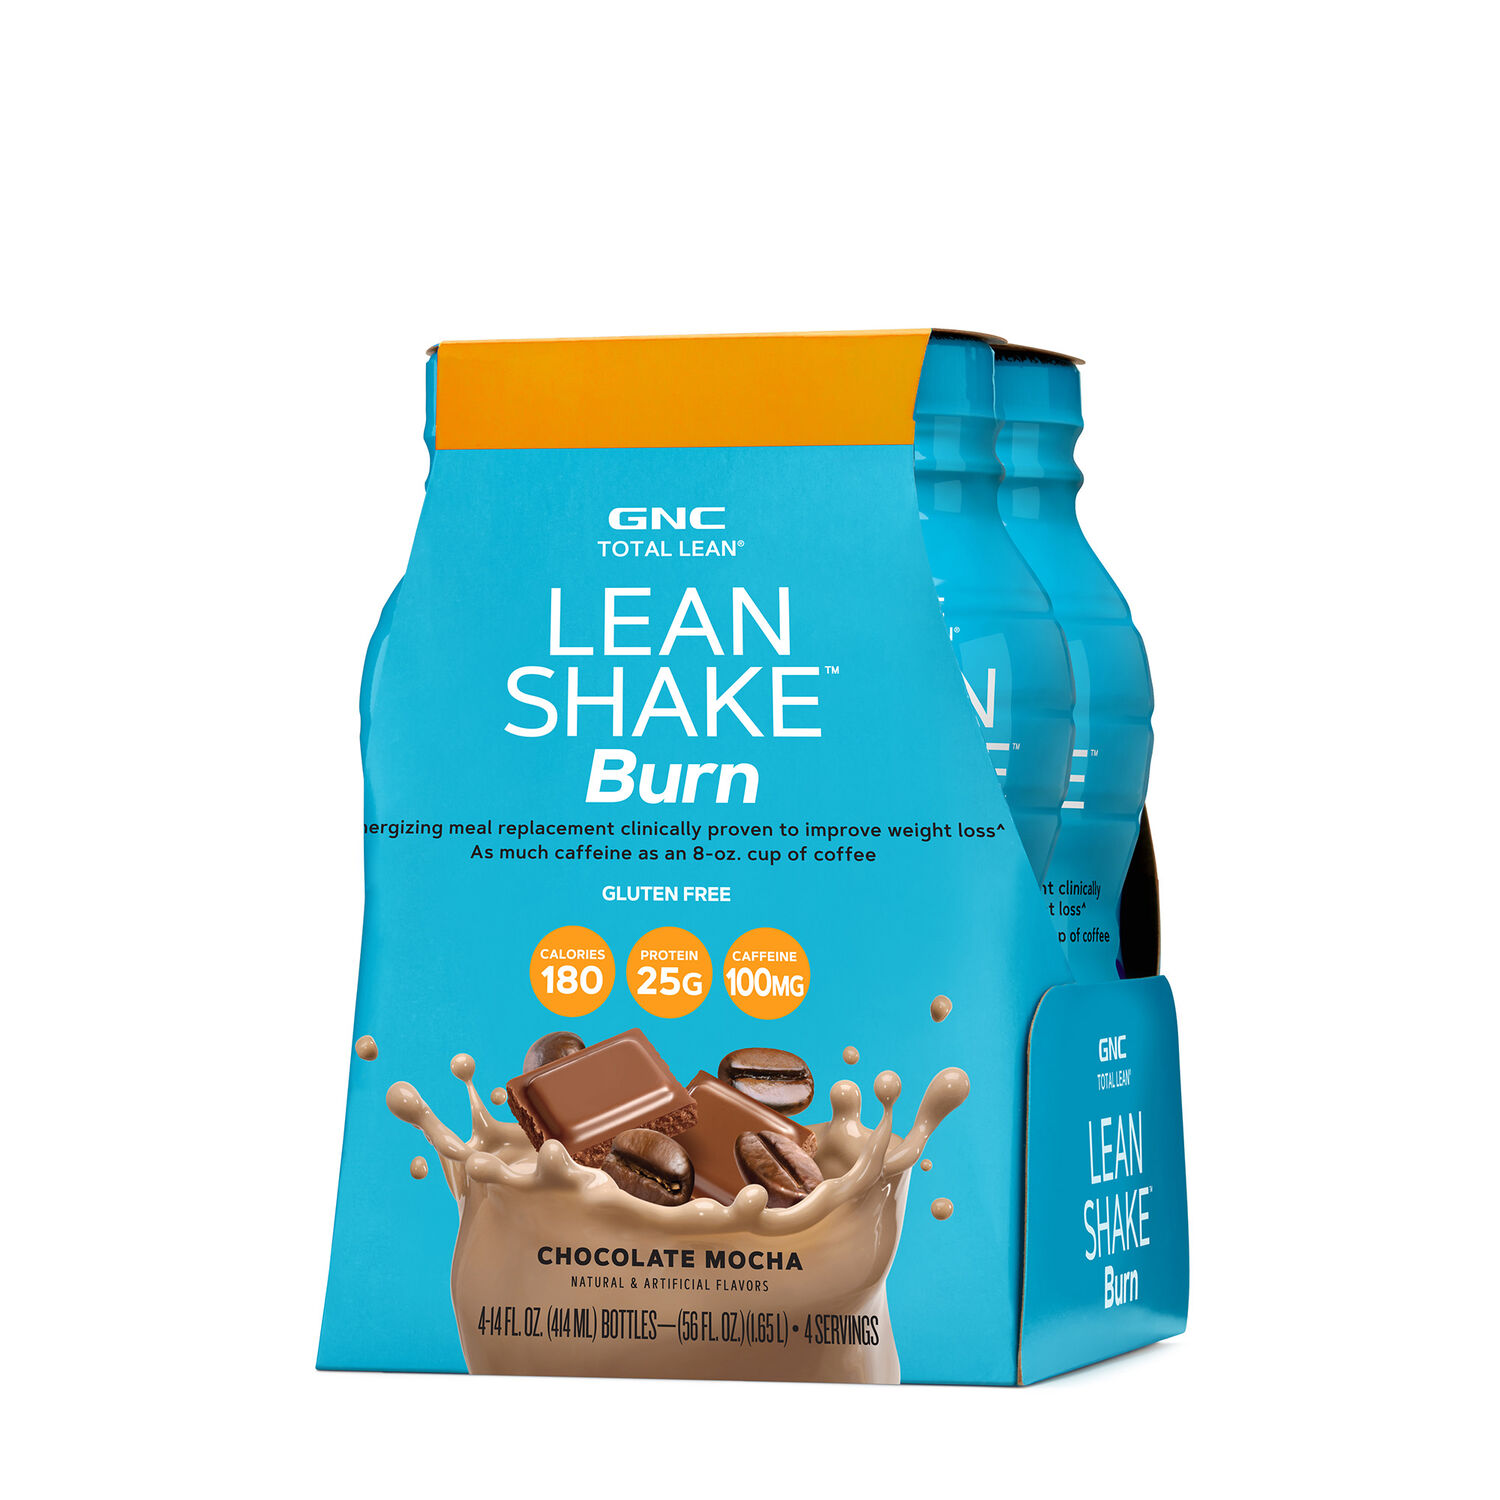 Science Behind GNC Lean Shake Burn - GEG Research and Consulting